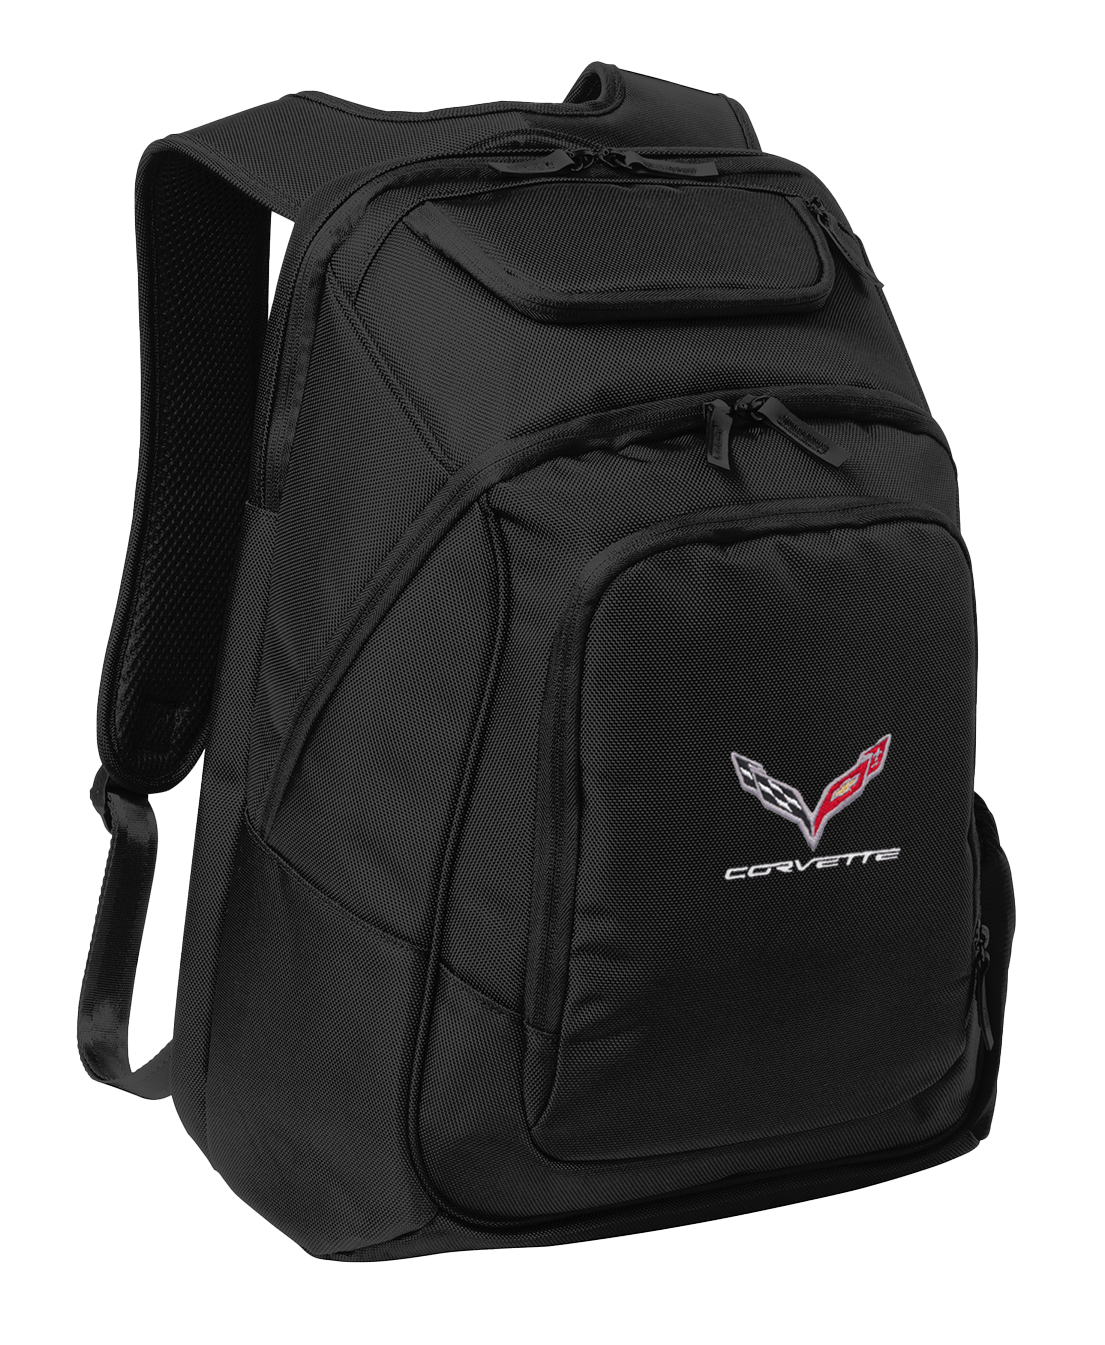 C7 Corvette Embroidered Backpack